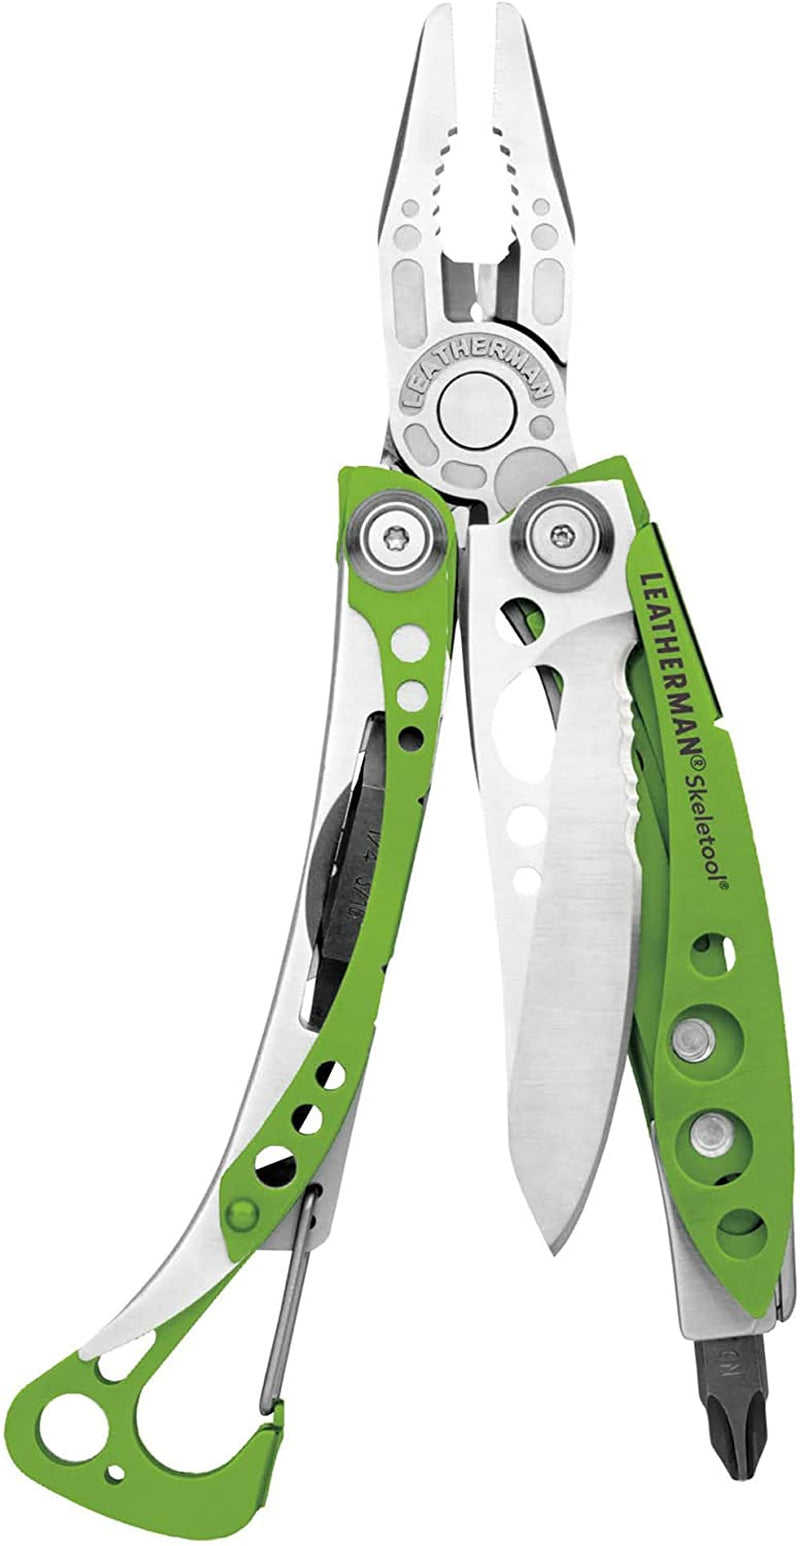 Leatherman, Leatherman Skeletool - Lightweight Multipurpose DIY Multi-Tool with 7 Essential Tools Including a Bottle Opener, Made in the USA, in Moss Green